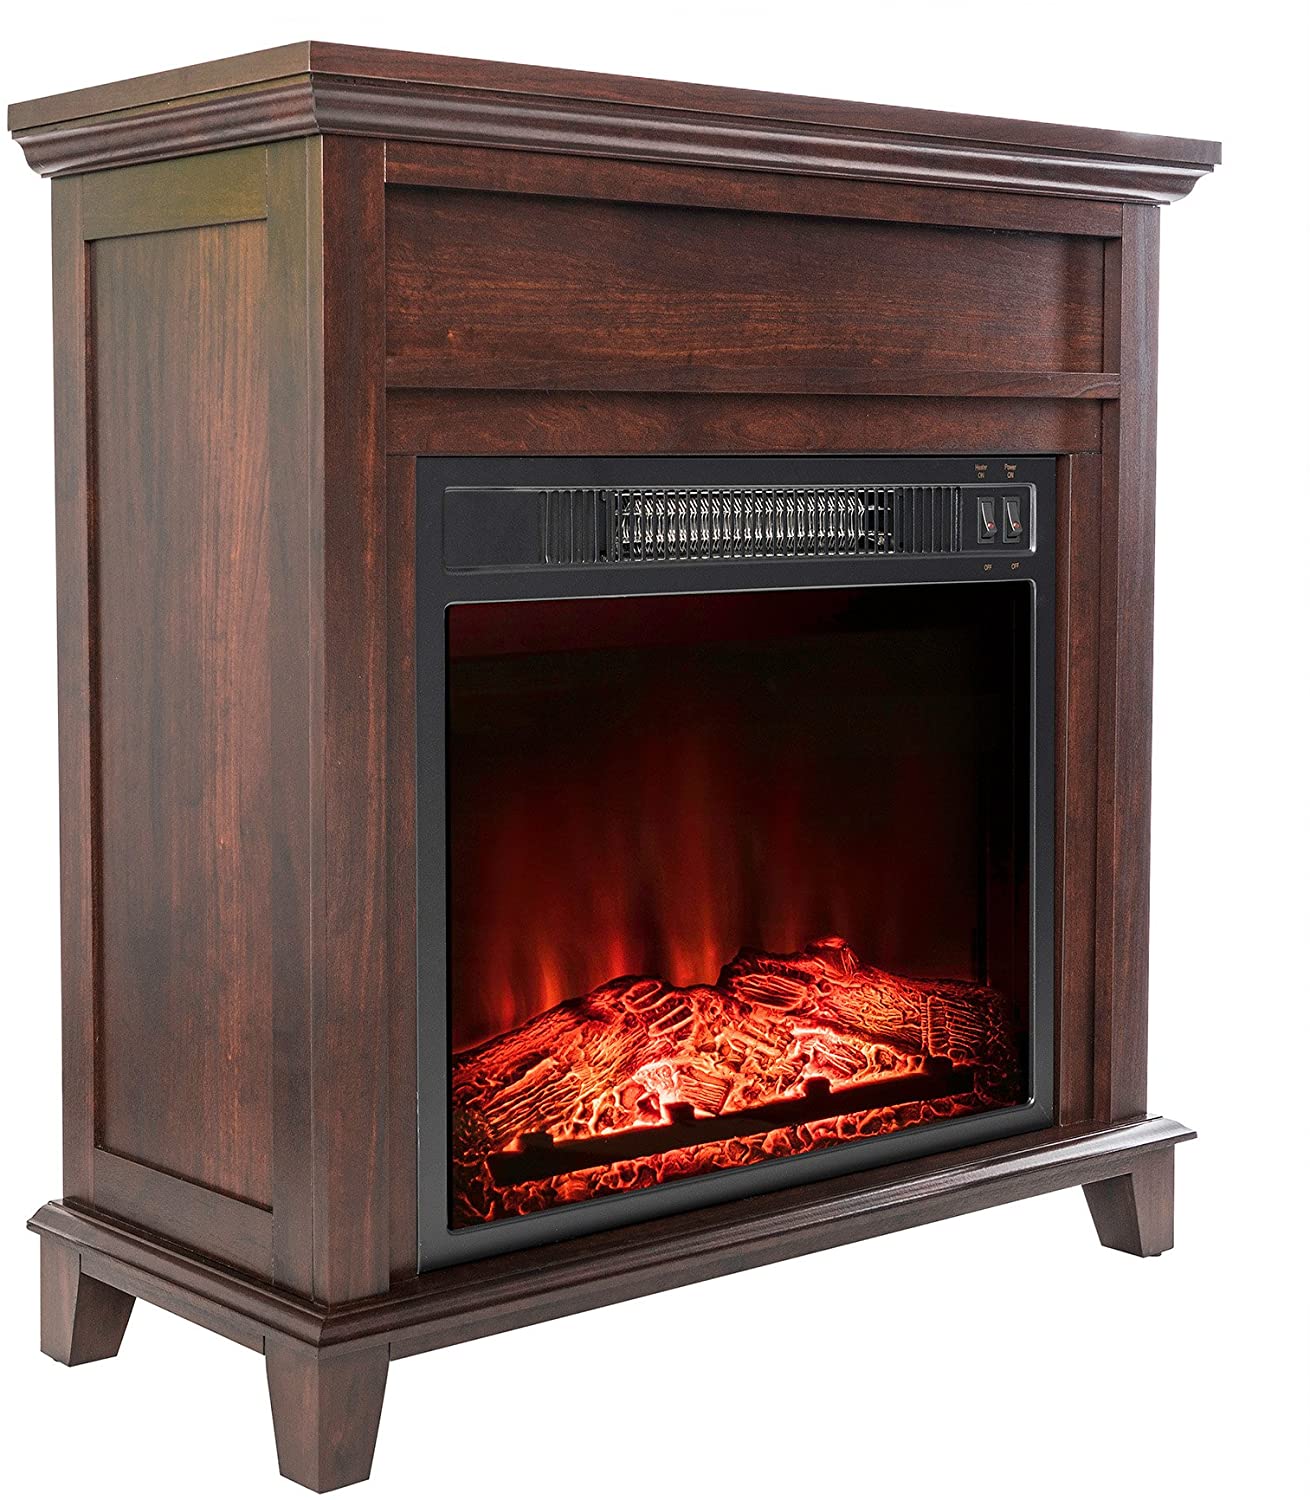 AKDY 27-In Electric Fireplace